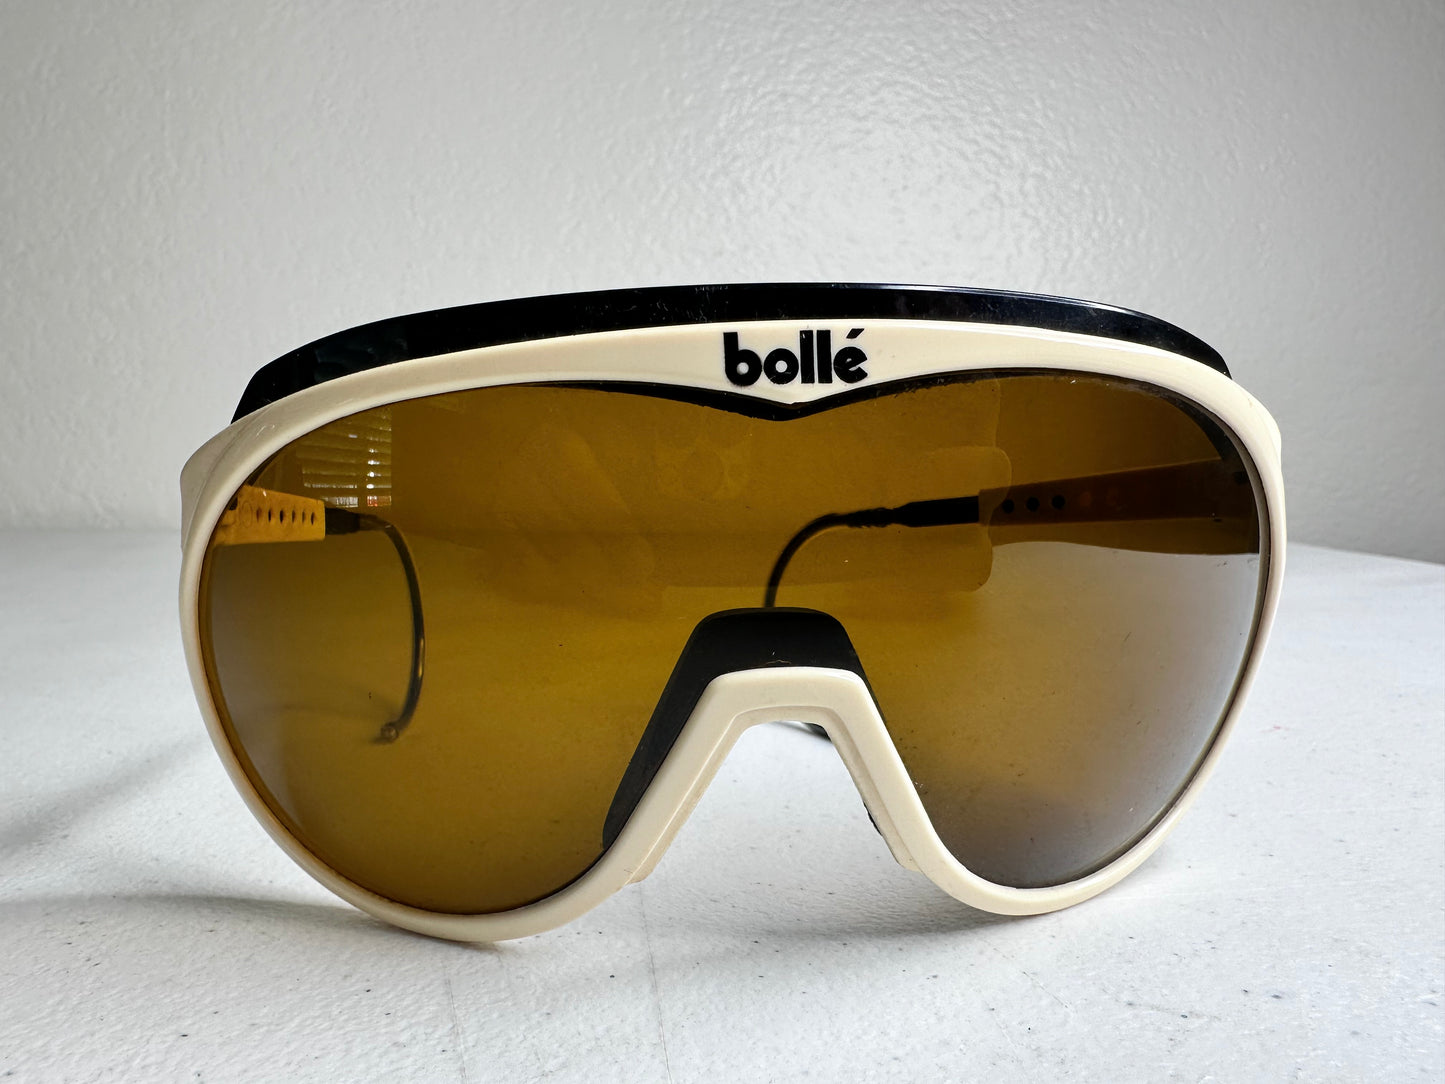 Vintage Bolle Chronoshield Sunglasses - Classic French Ski Goggles with Yellow Lenses